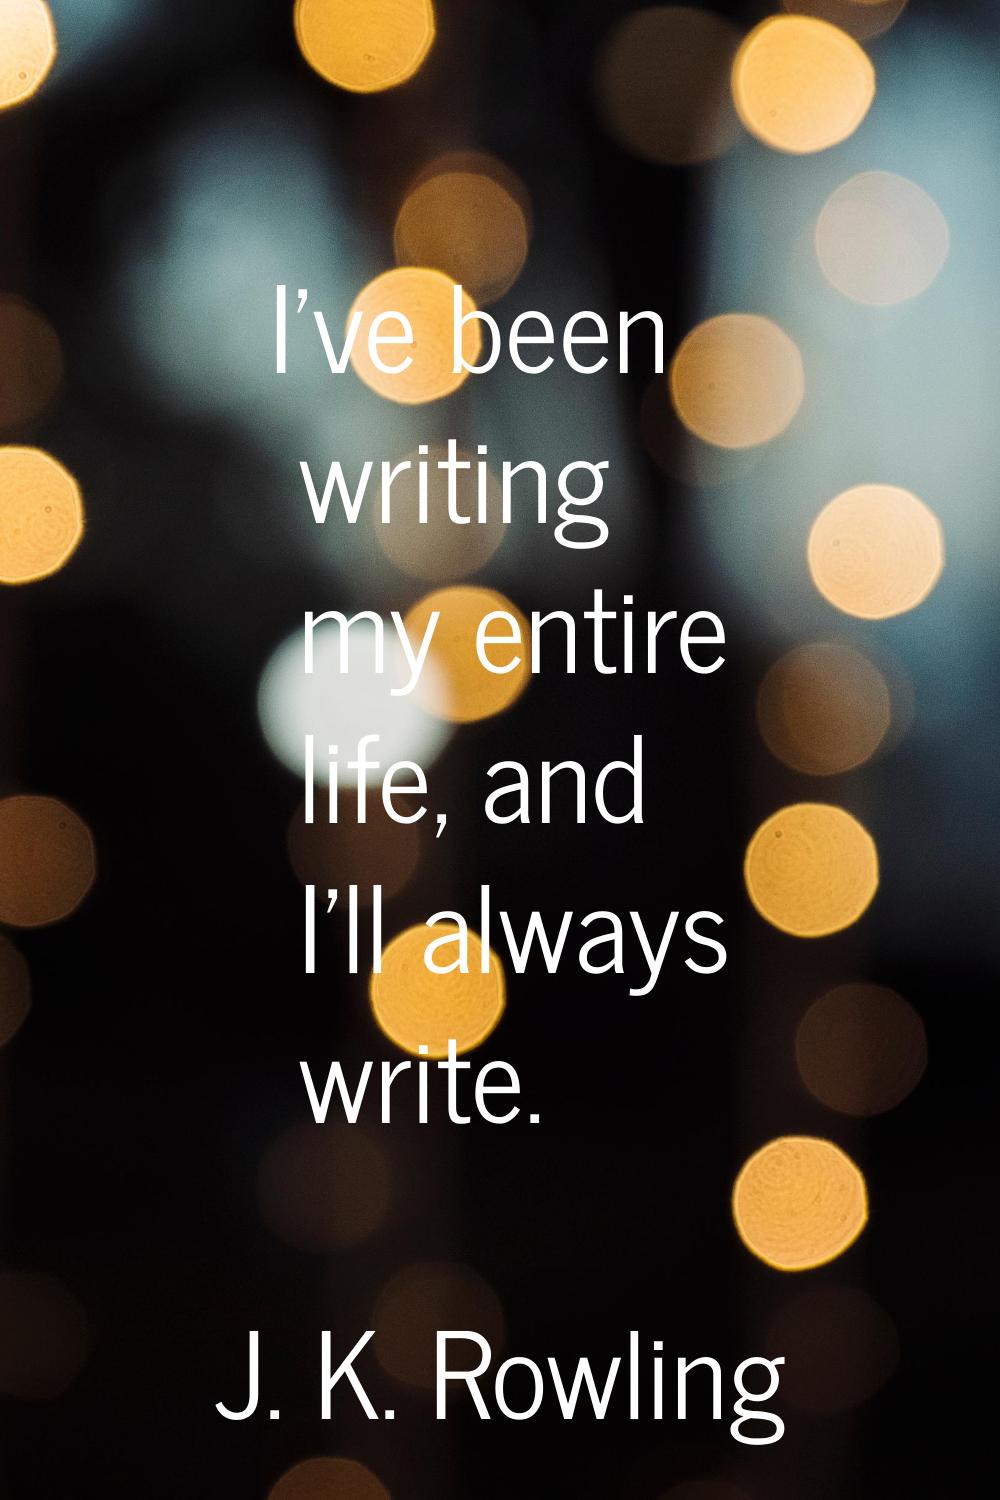 I've been writing my entire life, and I'll always write.